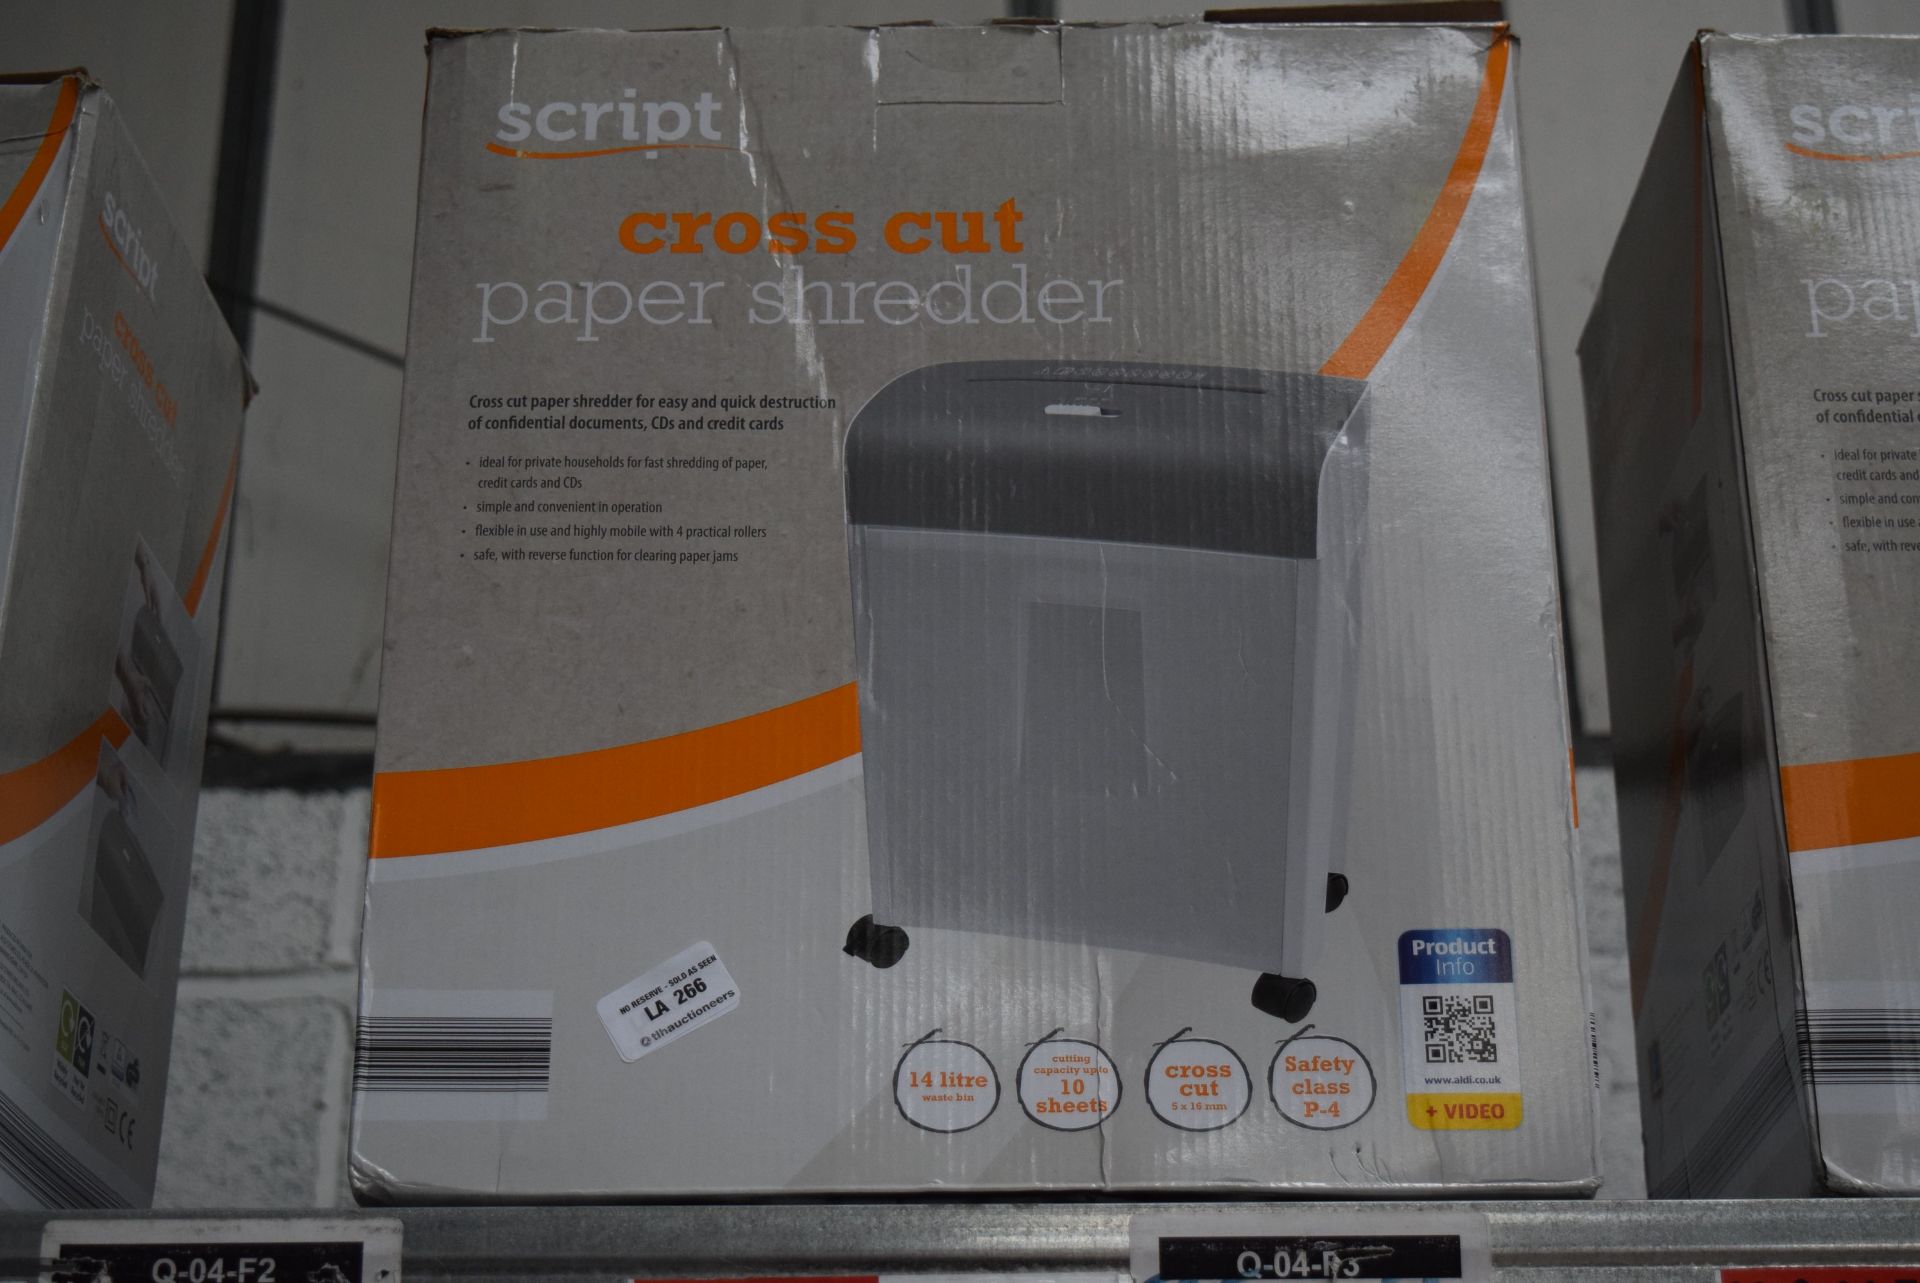 1 X BOXED SCRIPT CROSS CUT PAPER SHREDDER WITH UP TO 14L WASTE BIN RRP £20